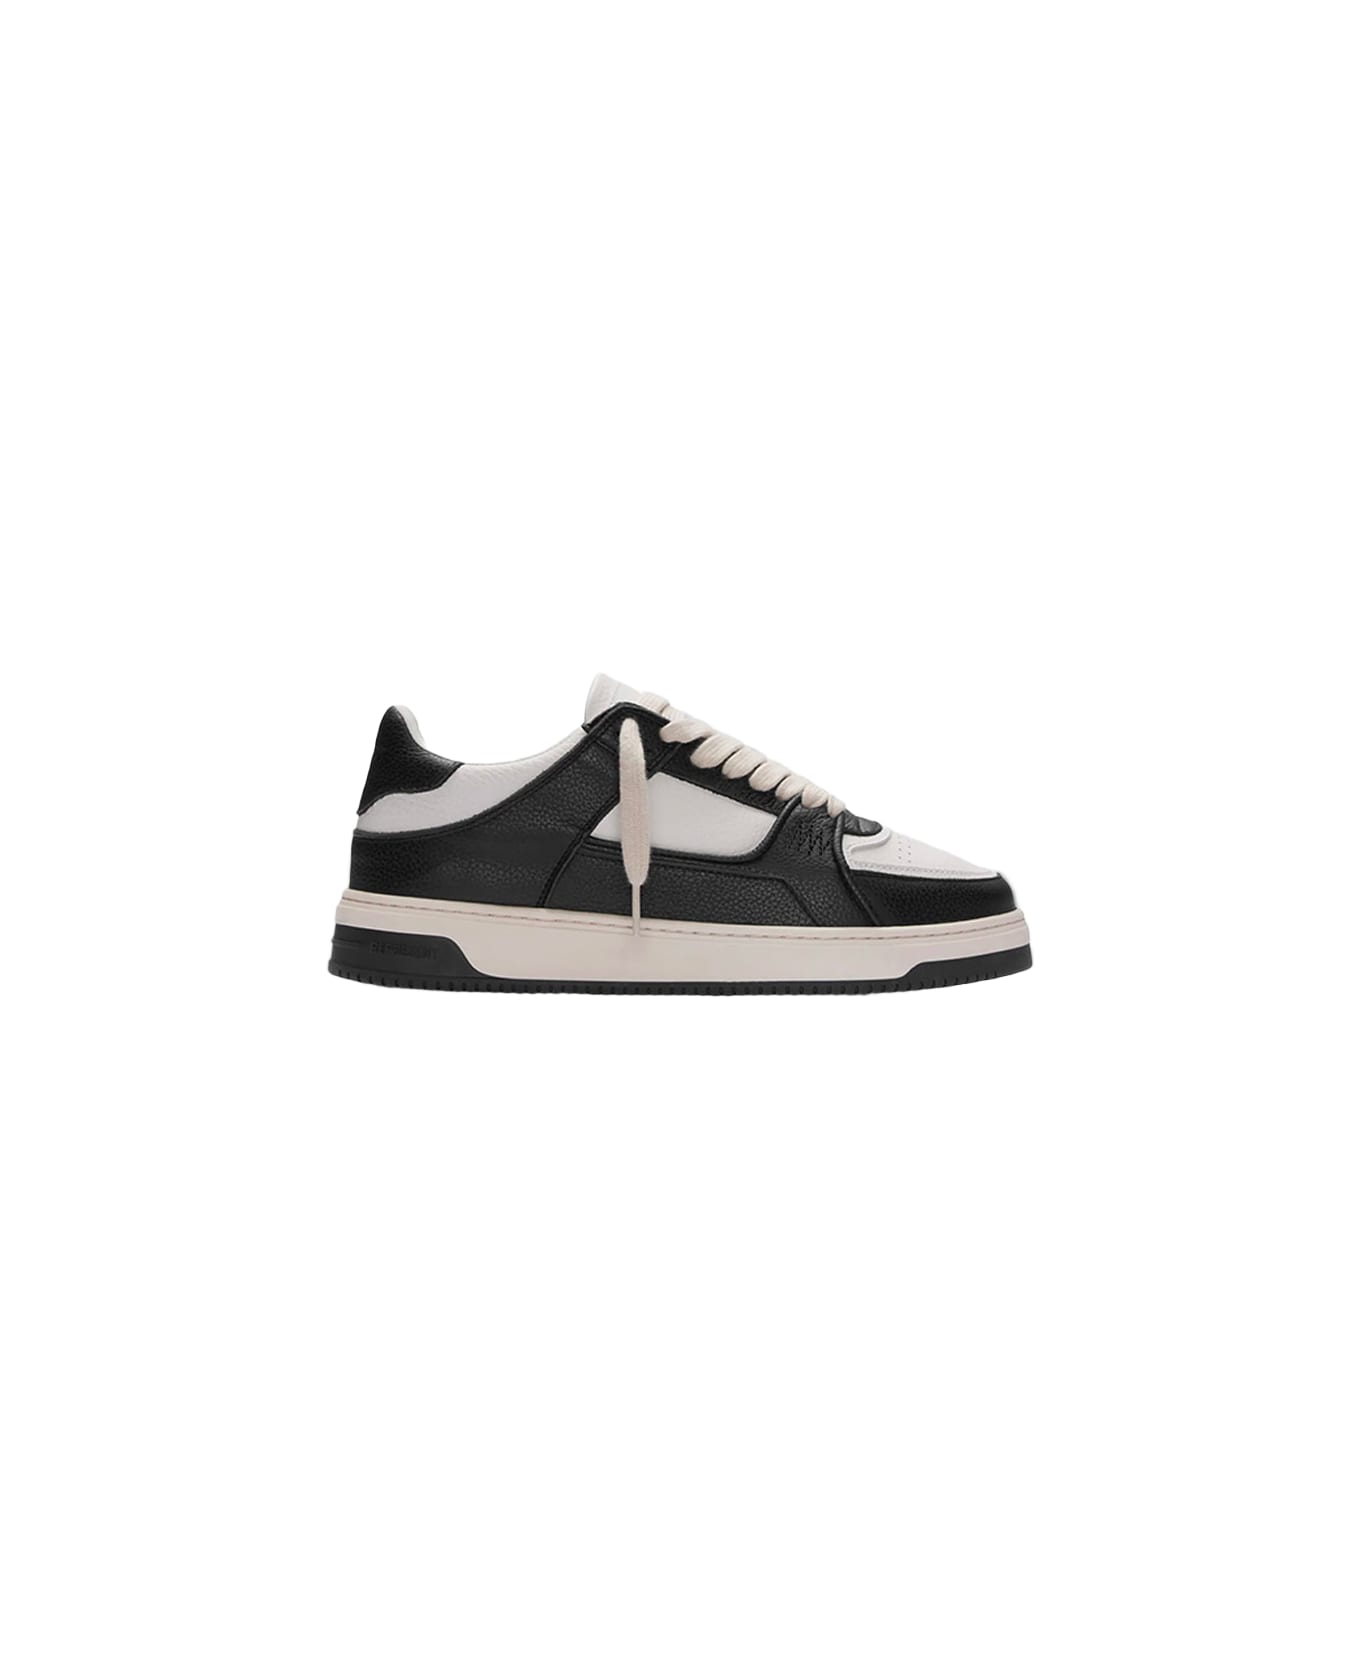 REPRESENT Apex Off White And Black Leather Low Top Sneaker - Apex - Black